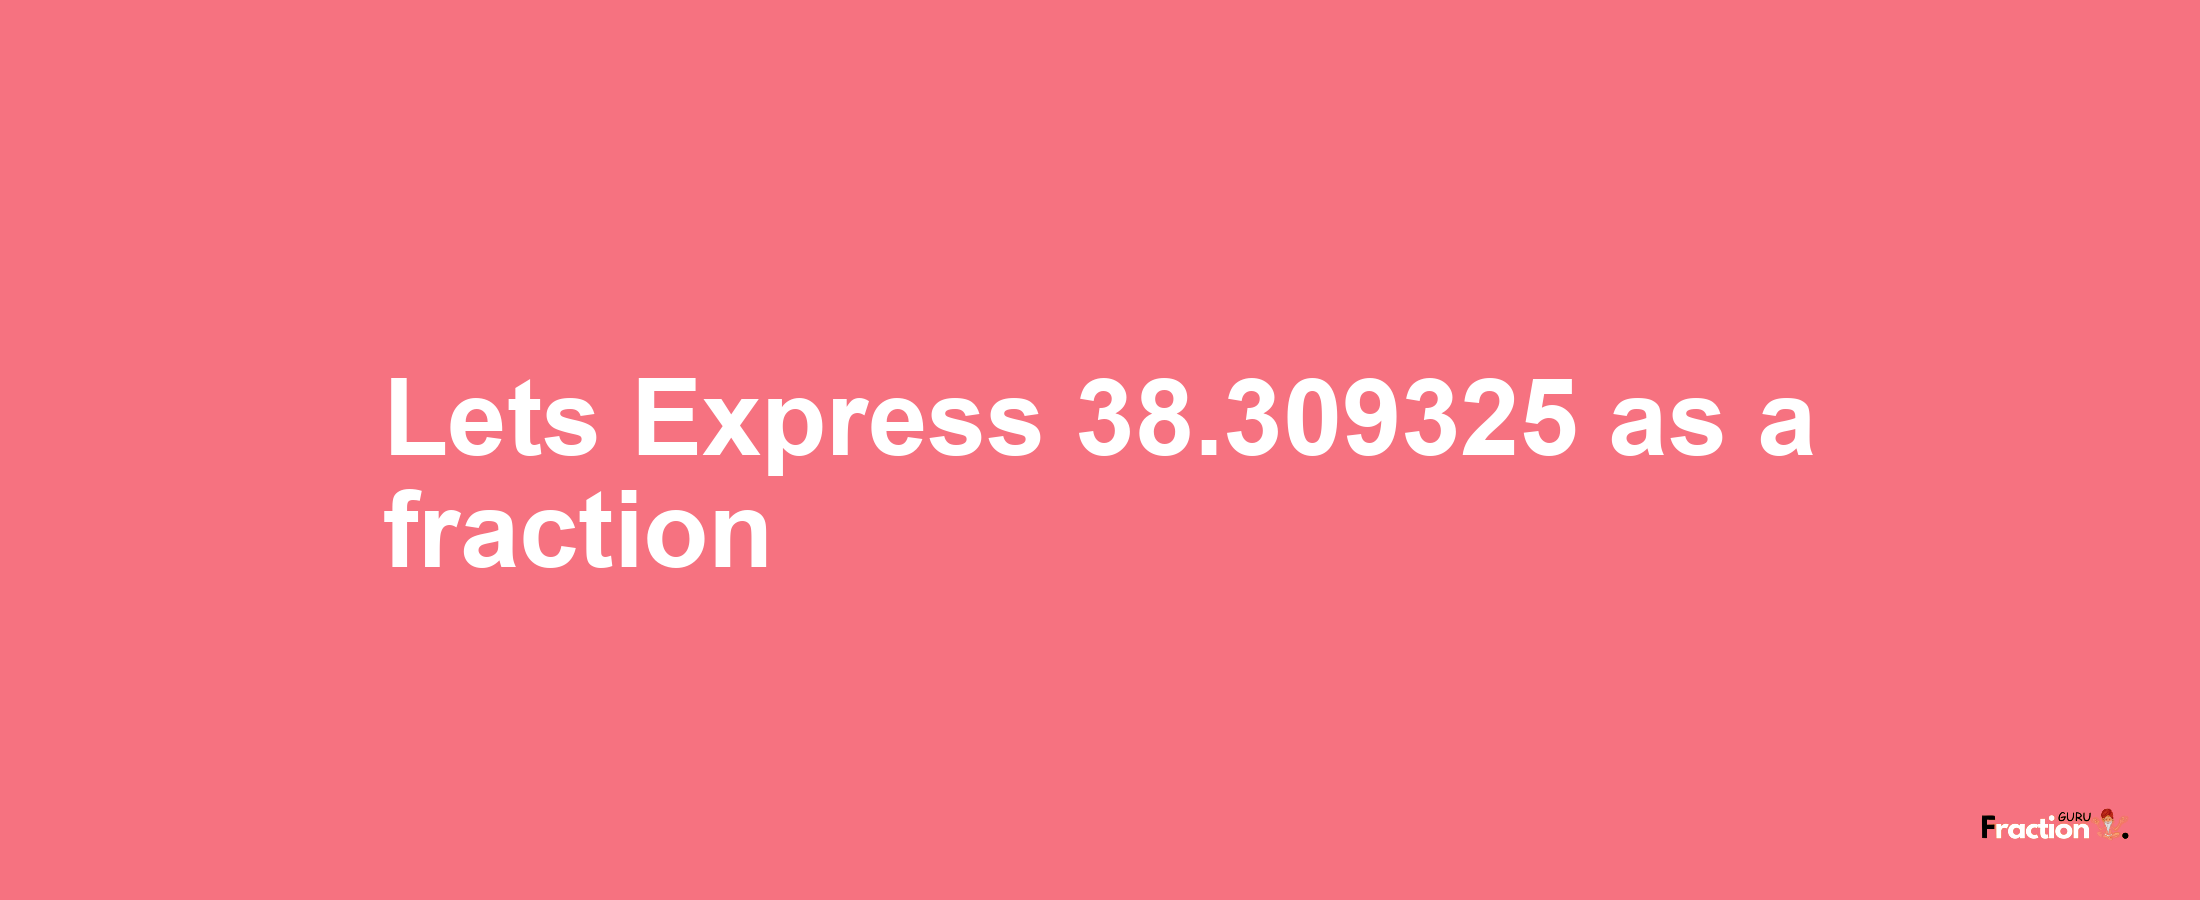 Lets Express 38.309325 as afraction